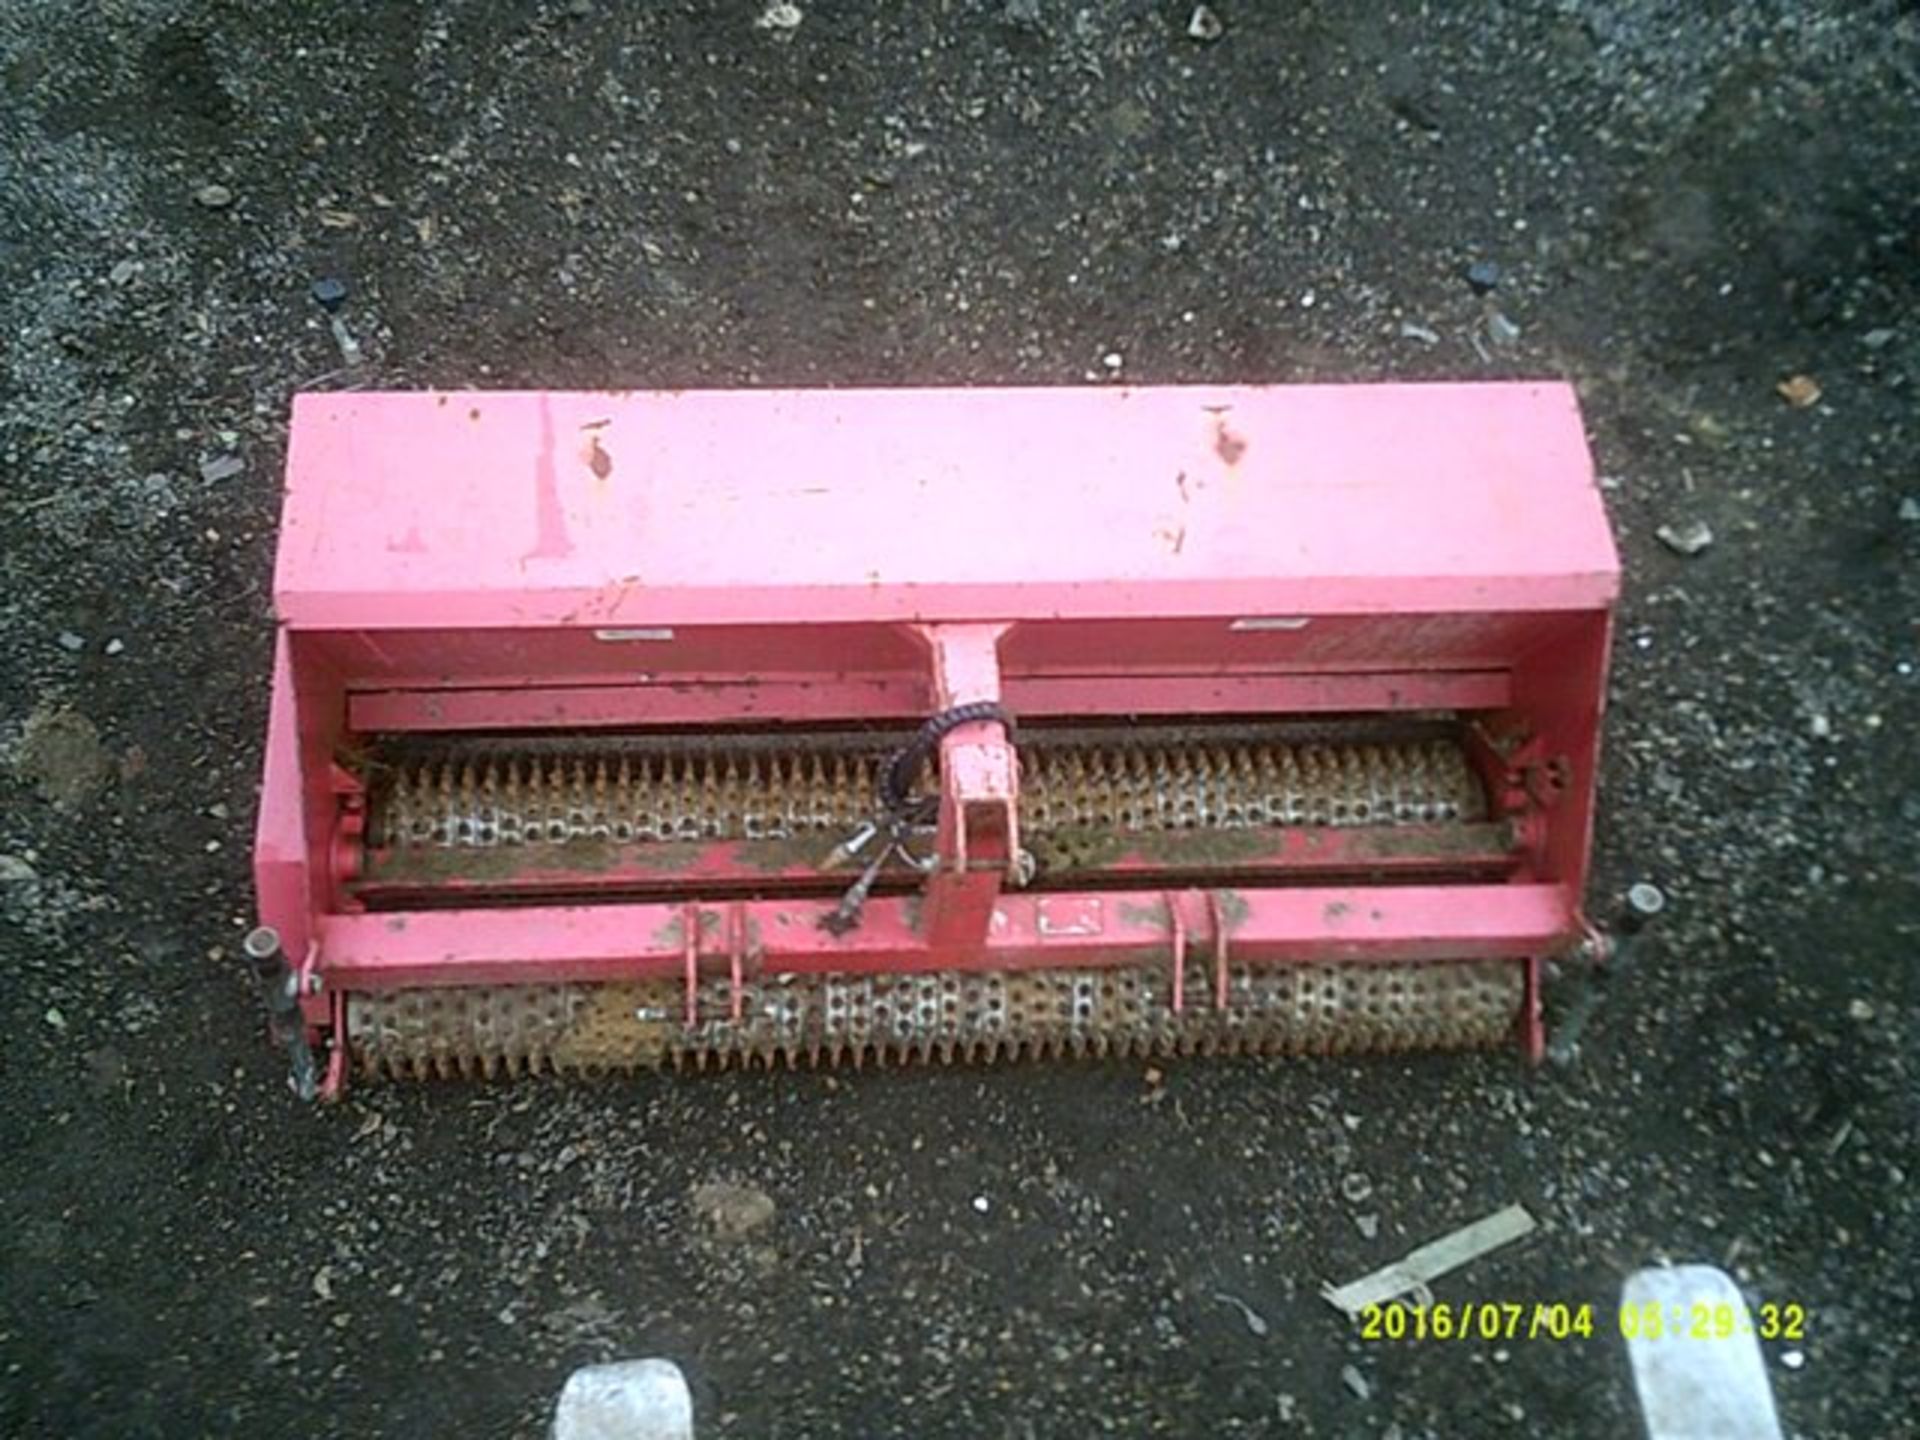 Blec 2100/02 multi seeder. Serial no. 80813, year 2008 - Image 2 of 4